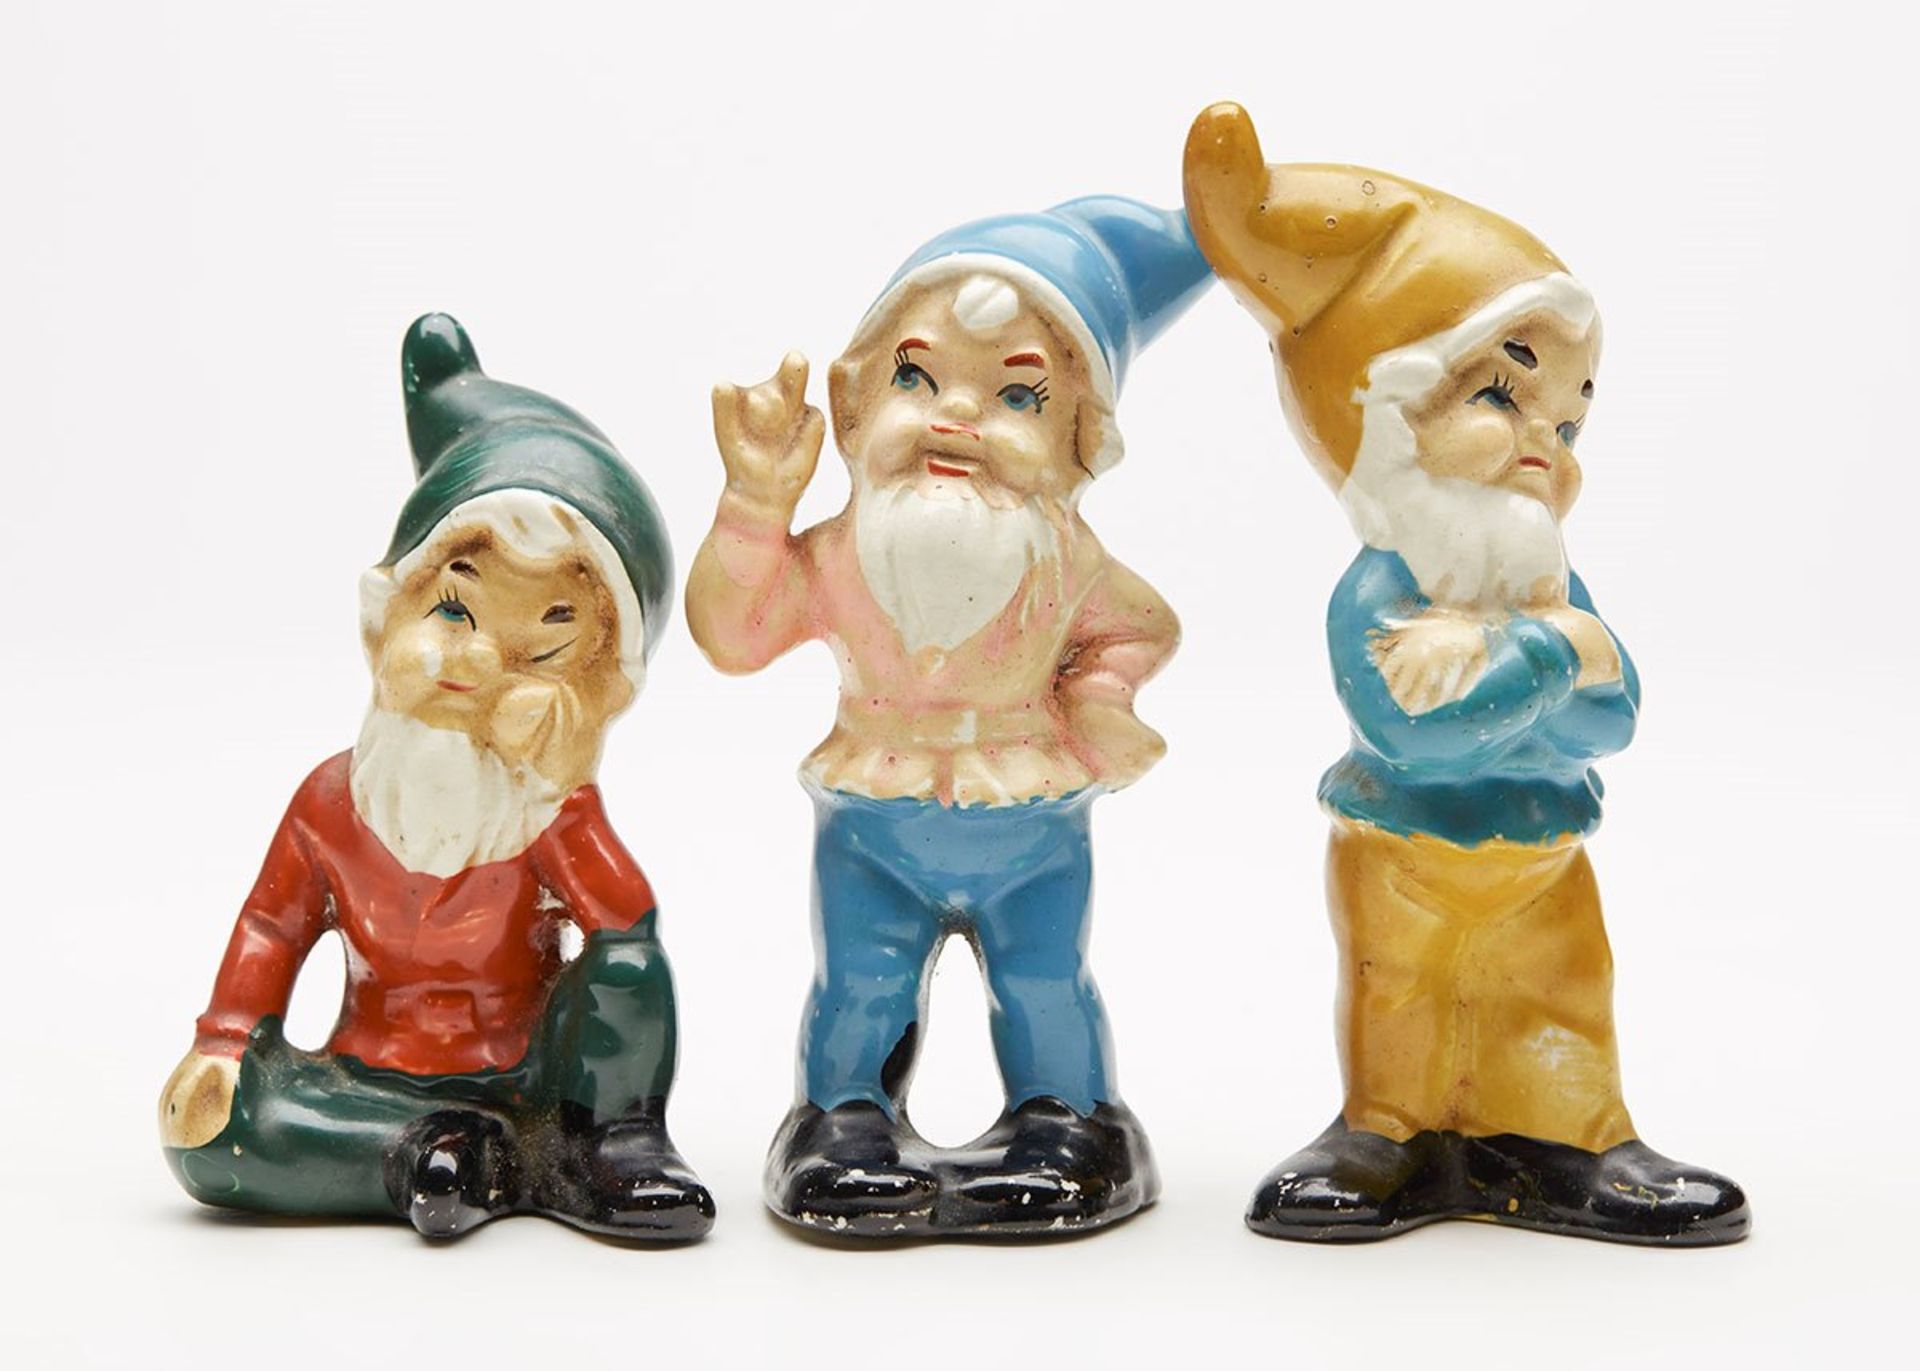 VINTAGE CONTINENTAL POTTERY GNOME FIGURES EARLY 20TH C